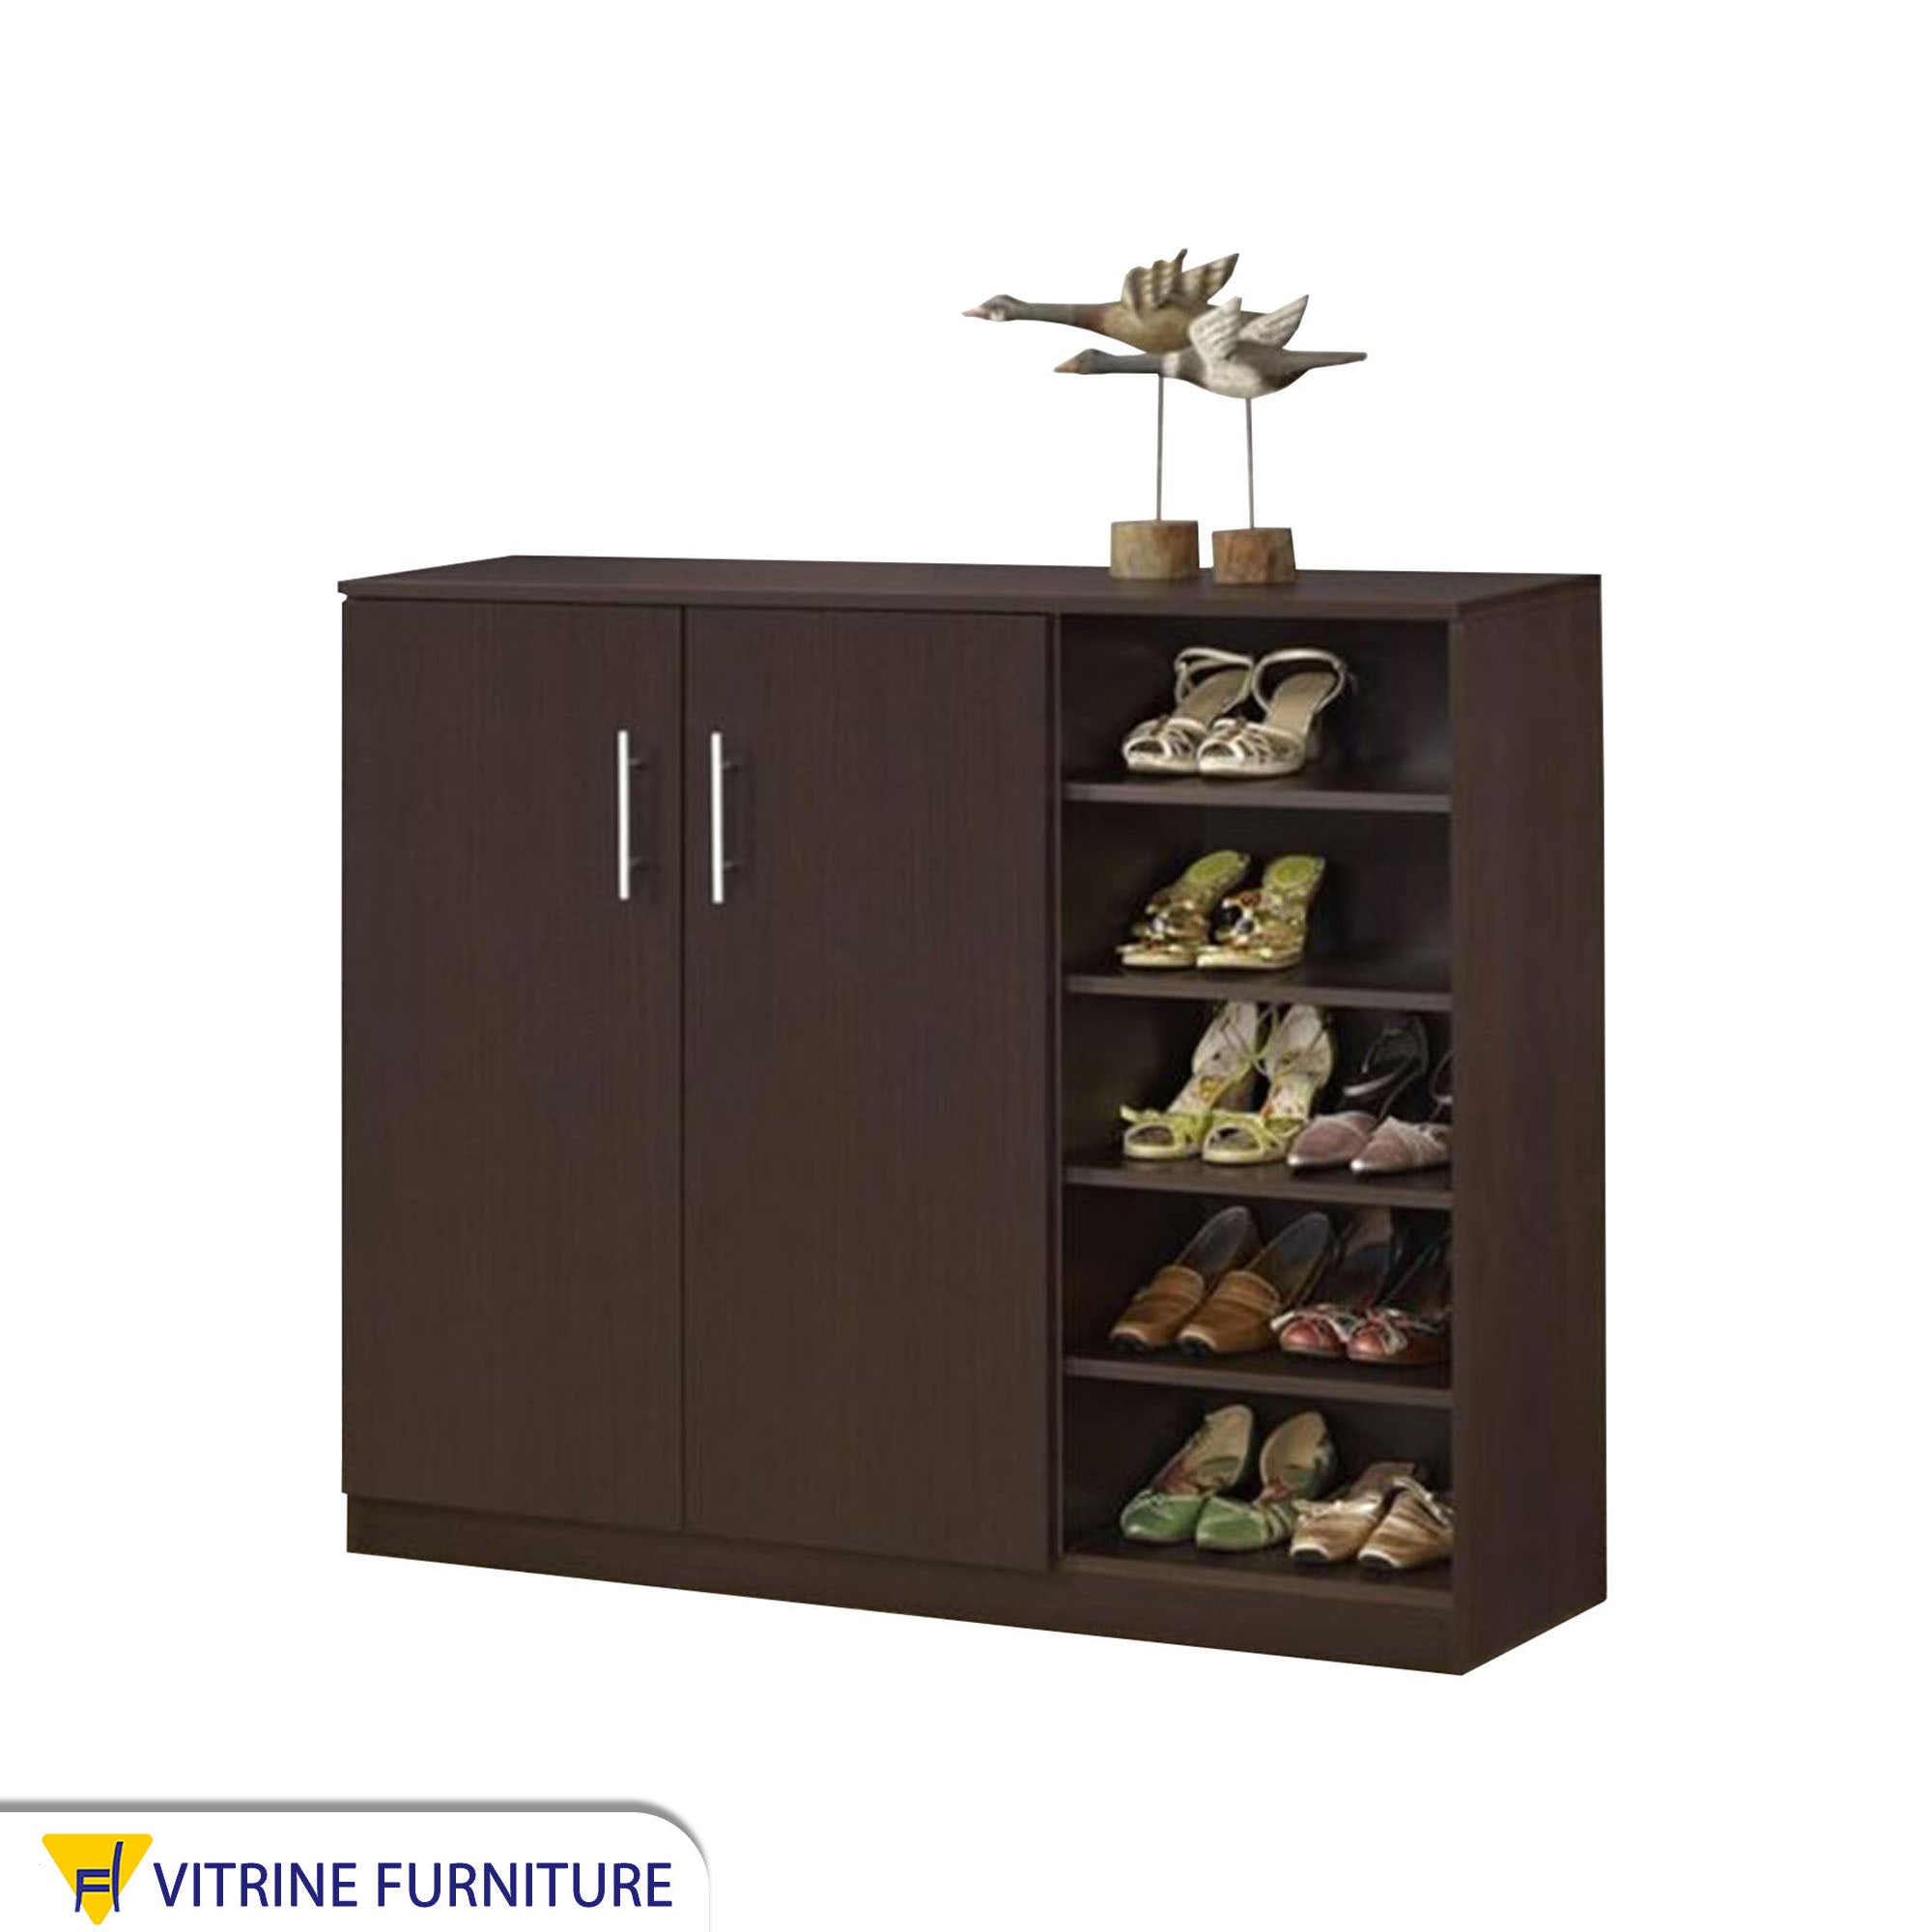 Brown shoe rack with two doors and open shelves